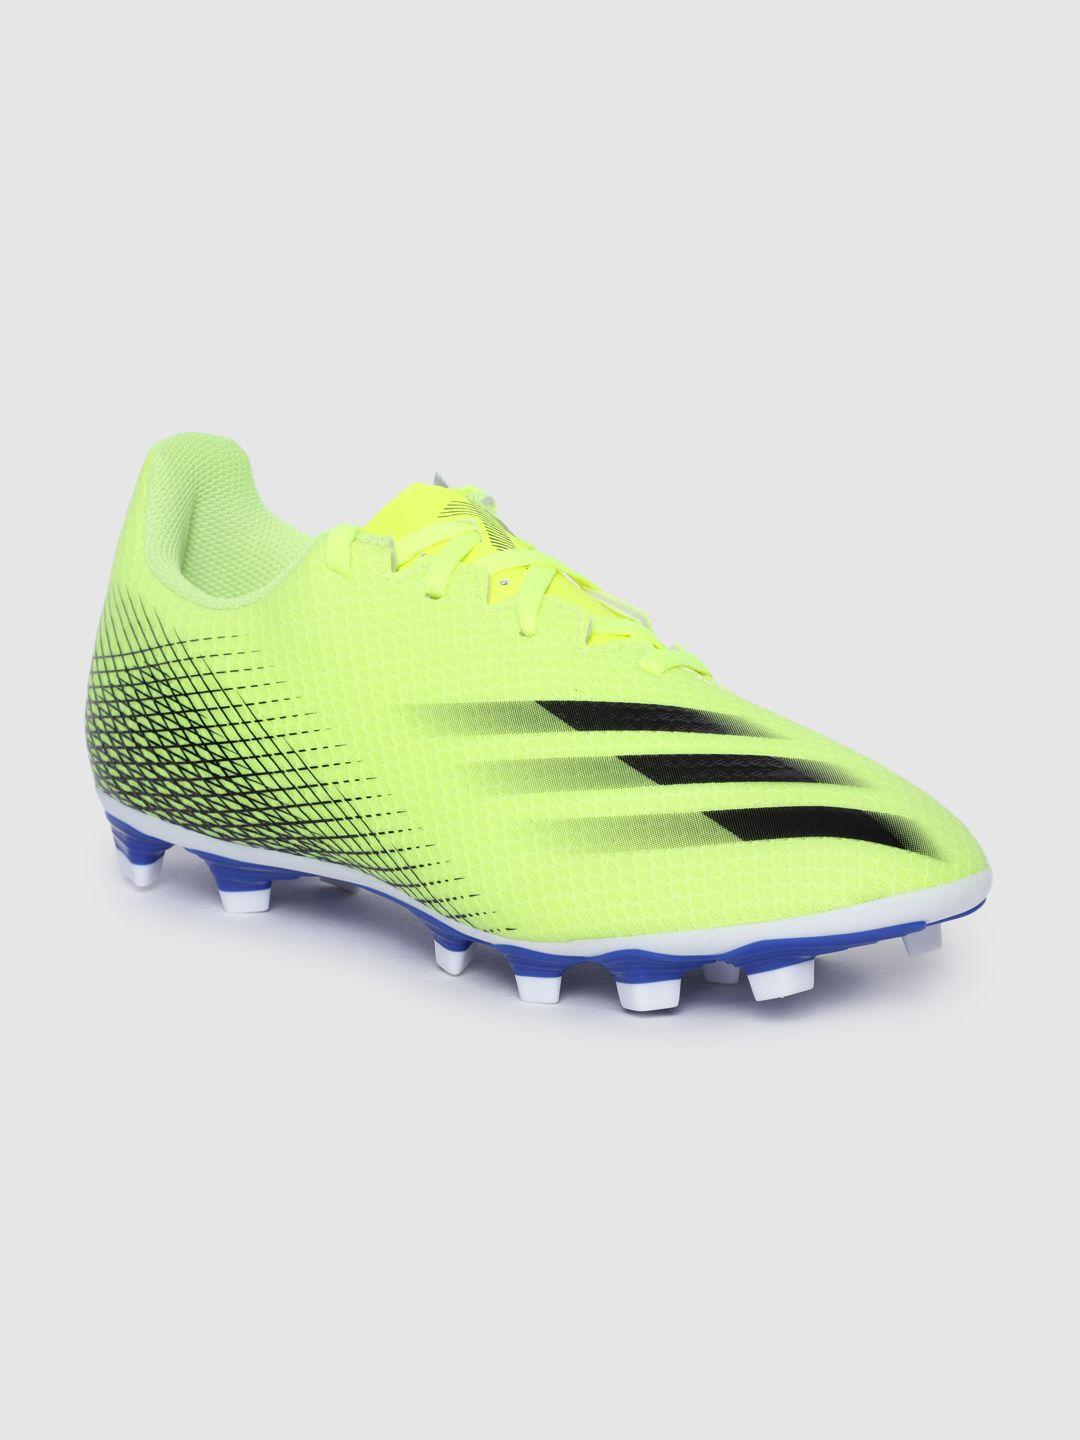 adidas men yellow x ghosted football shoes